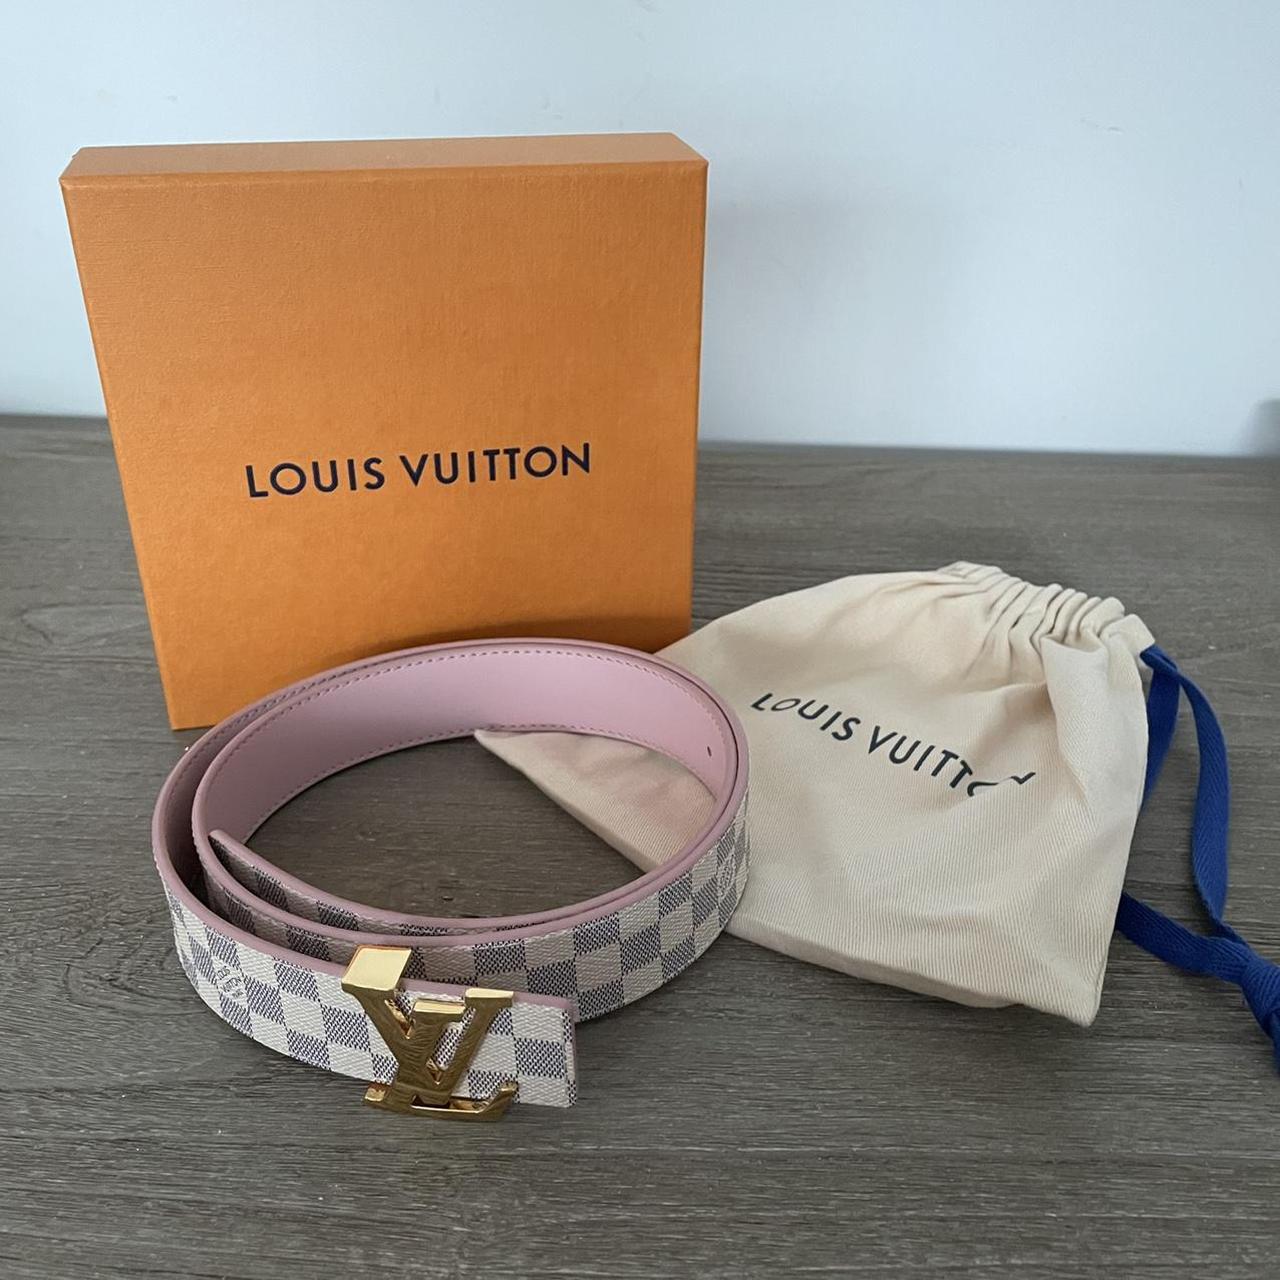 ❗️❗️❗️SOLD❗️❗️❗️ Louis Vuitton Easy Pouch on Strap 🤍 I - Depop